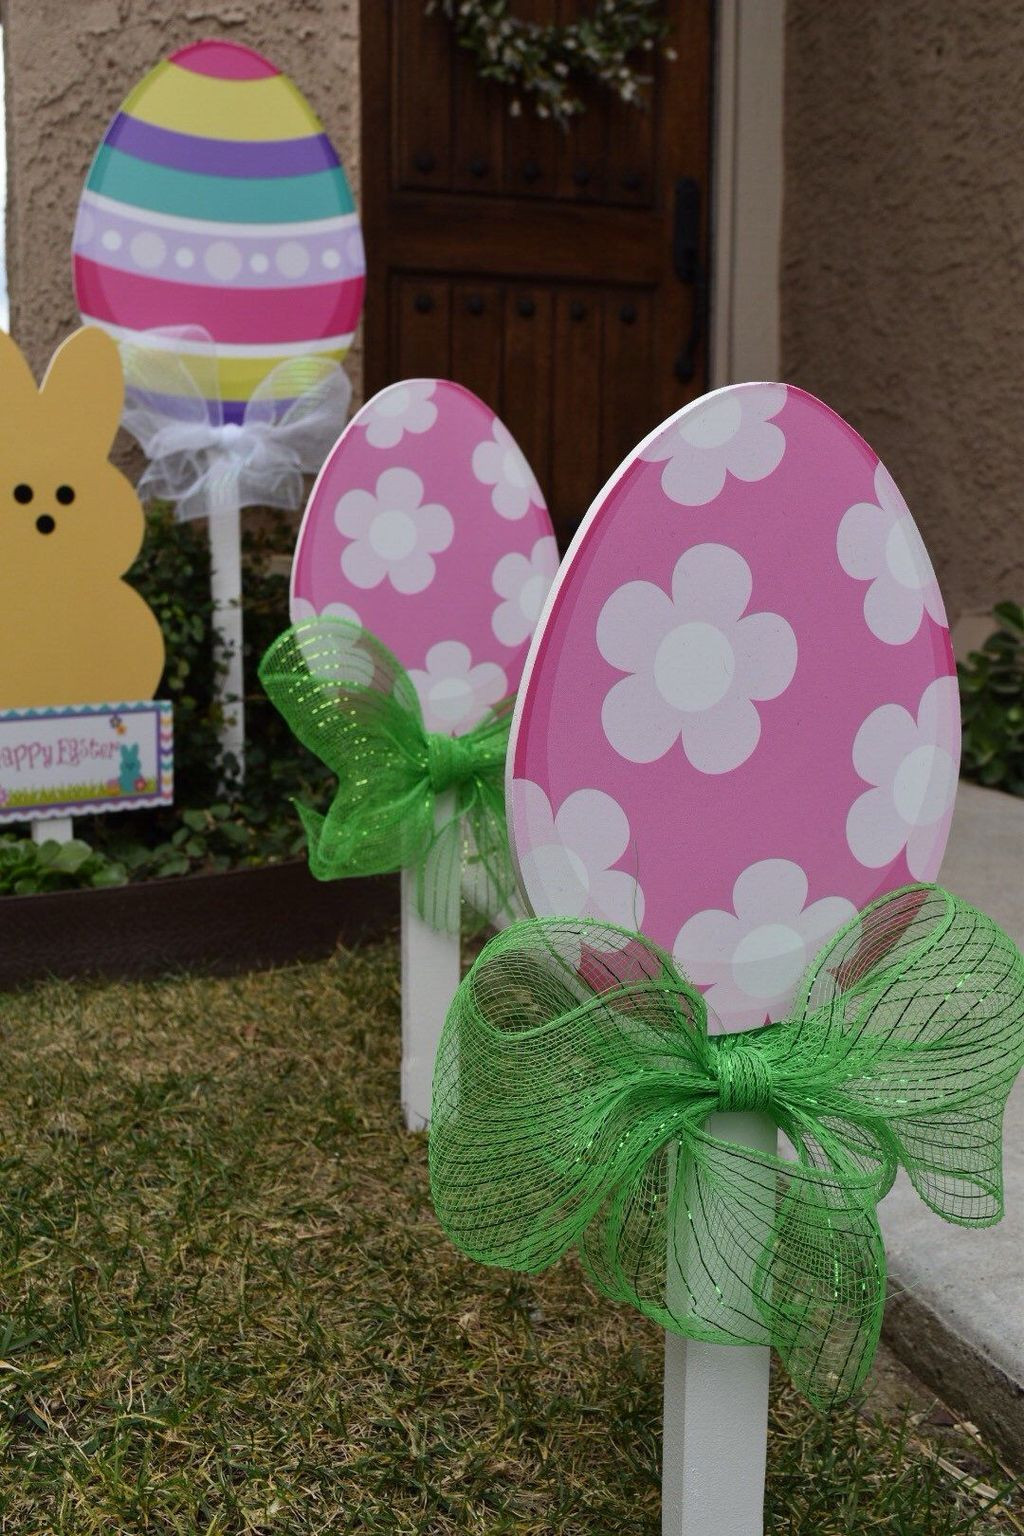 Diy Easter Yard Decorations
 36 Fascinating Outdoor Easter Decorations Ideas To Make